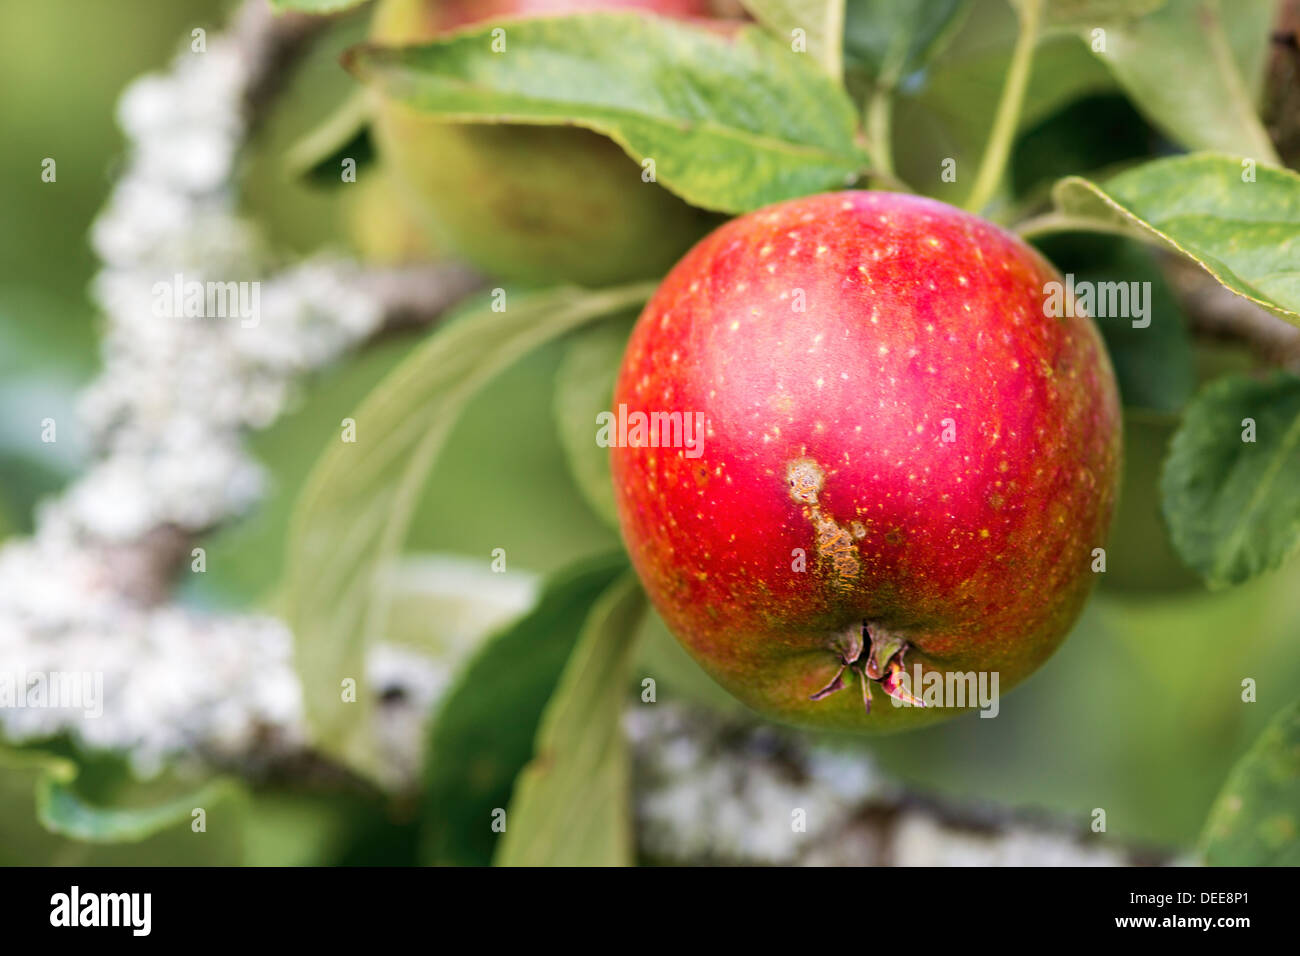 Bright red, ripe English eating apple Stock Photo